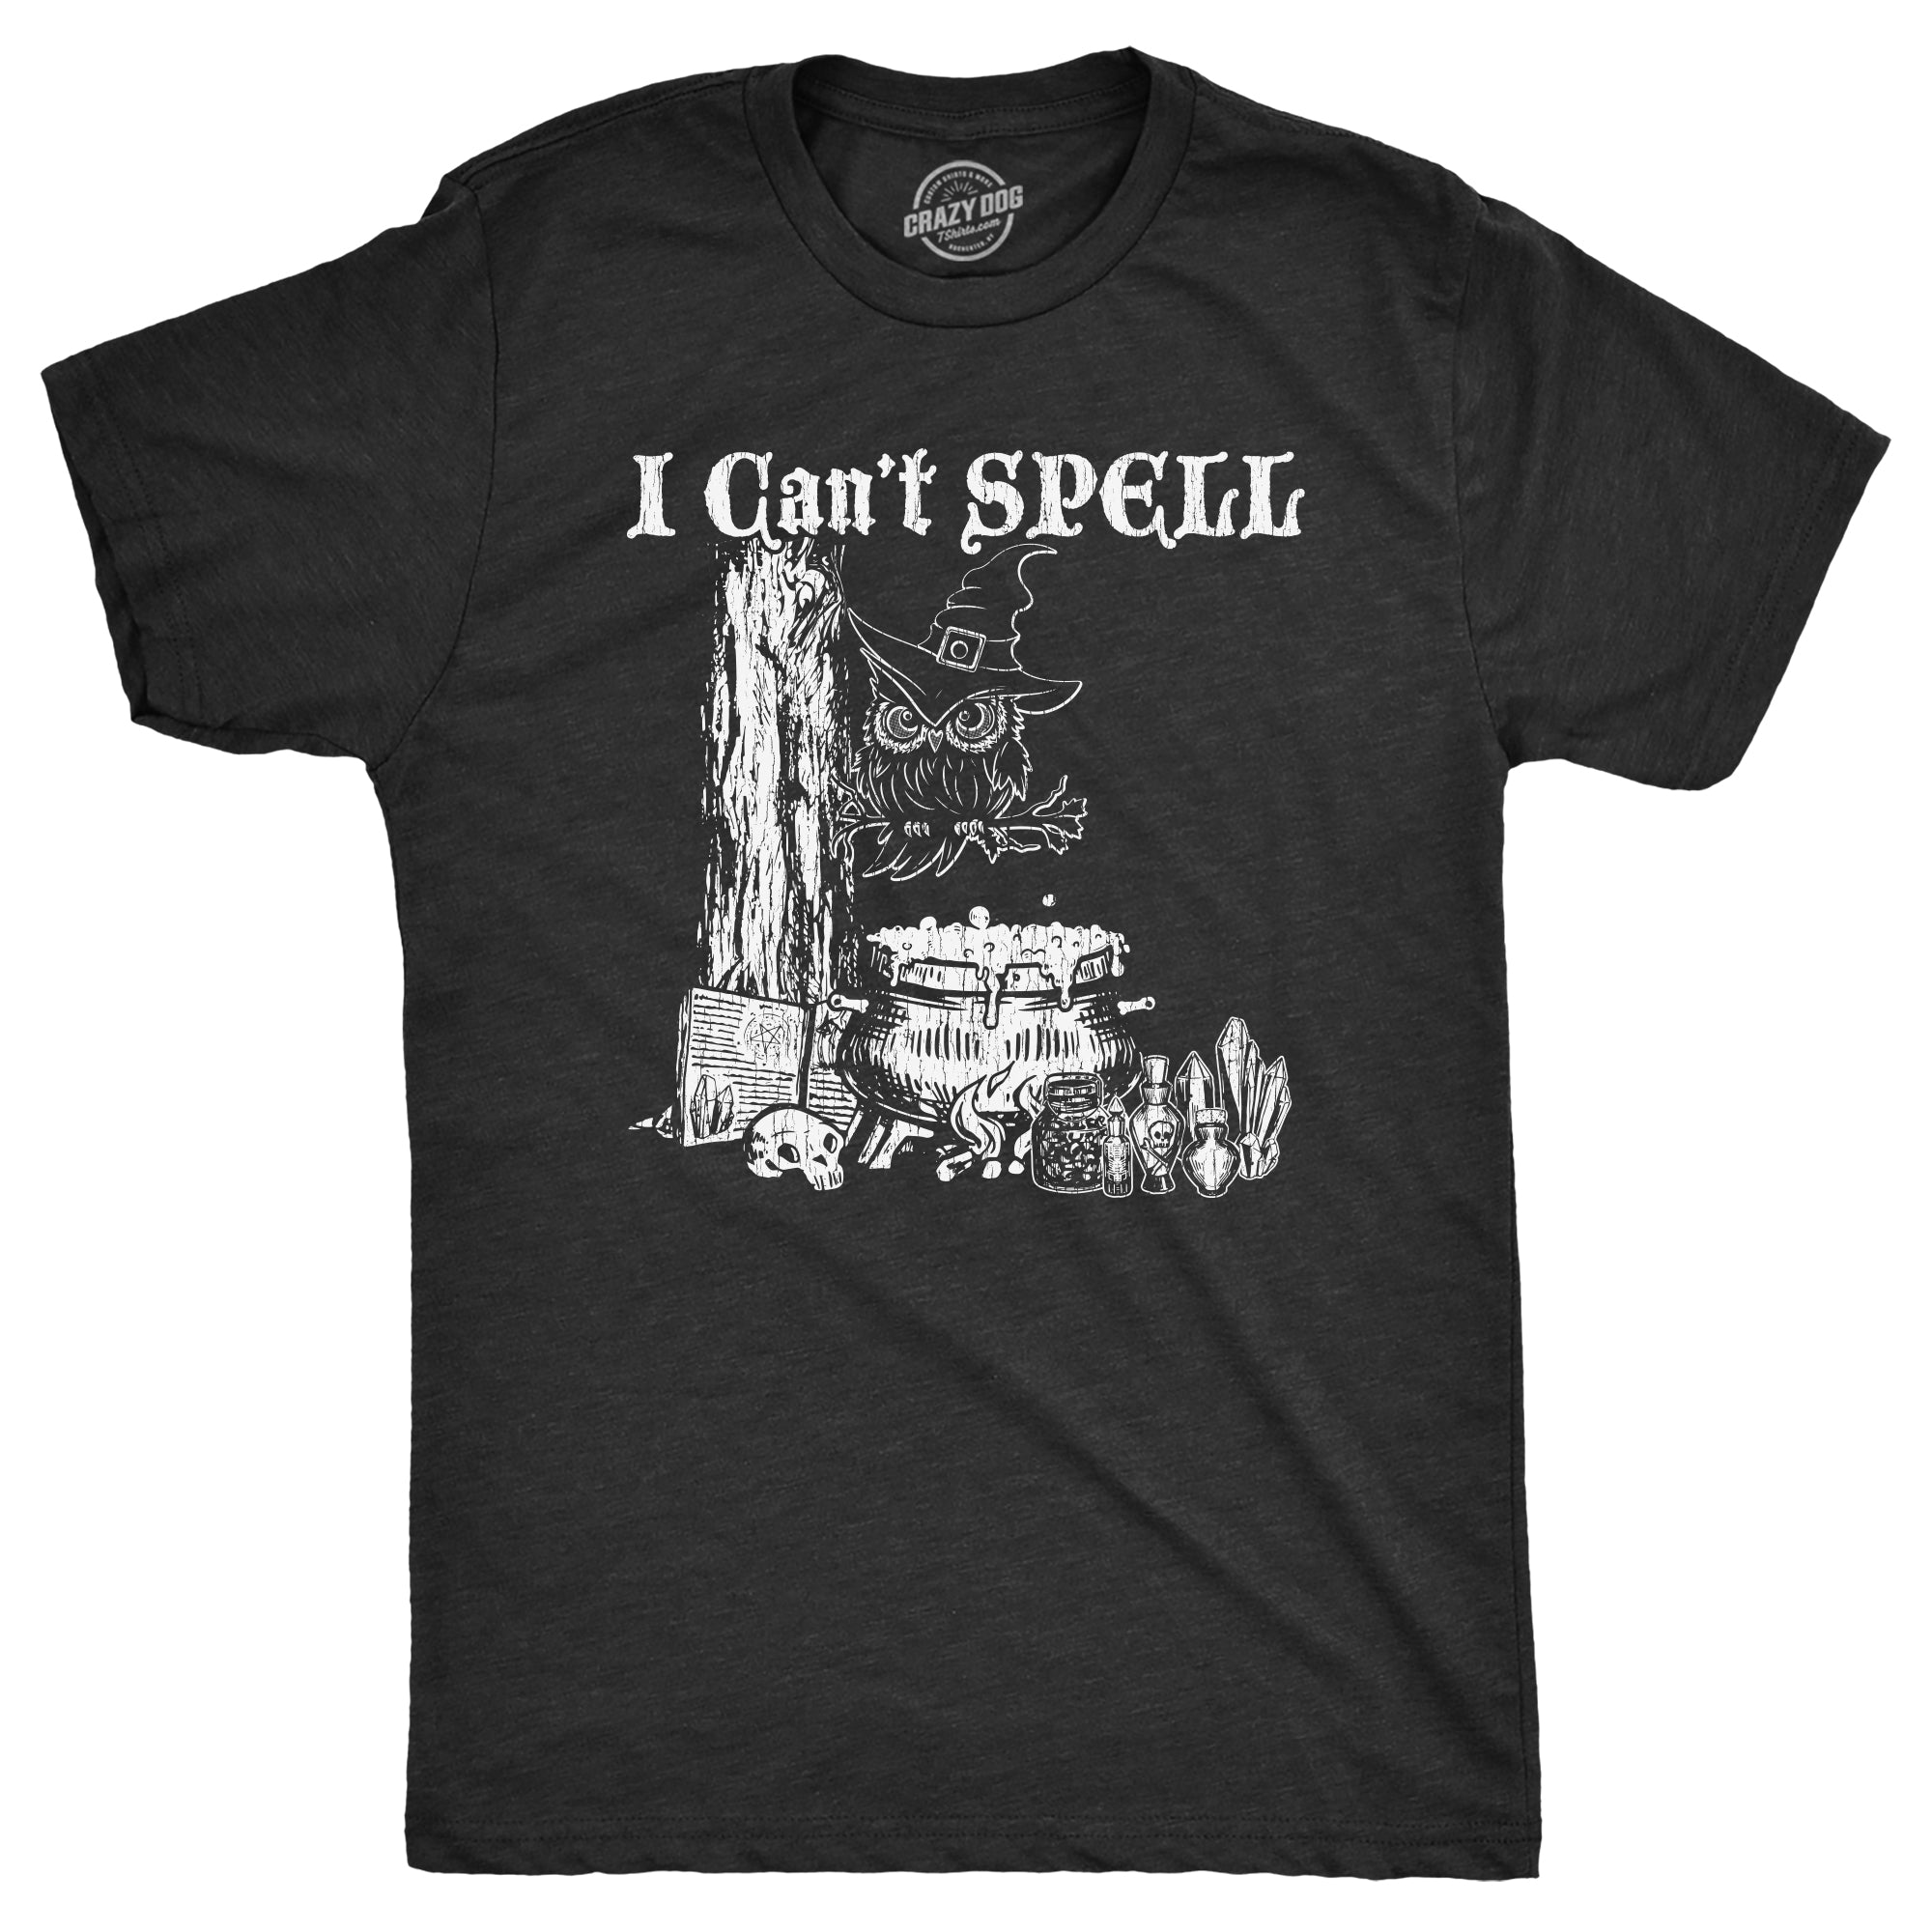 Funny Heather Black - SPELL I Cant Spell Mens T Shirt Nerdy Halloween Sarcastic Tee